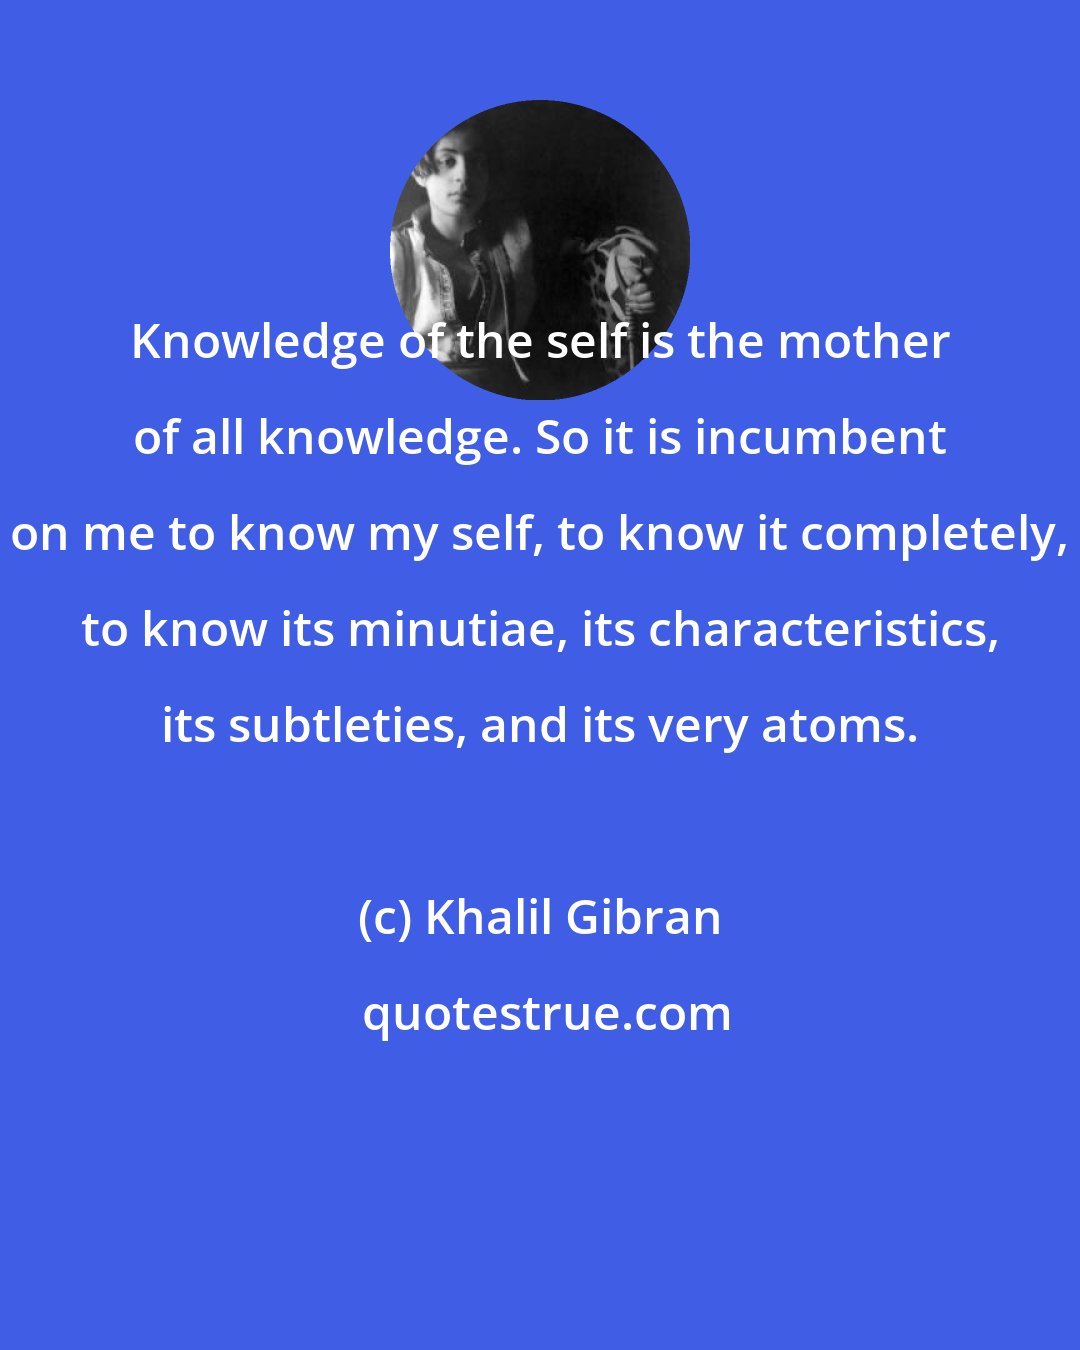 Khalil Gibran: Knowledge of the self is the mother of all knowledge. So it is incumbent on me to know my self, to know it completely, to know its minutiae, its characteristics, its subtleties, and its very atoms.